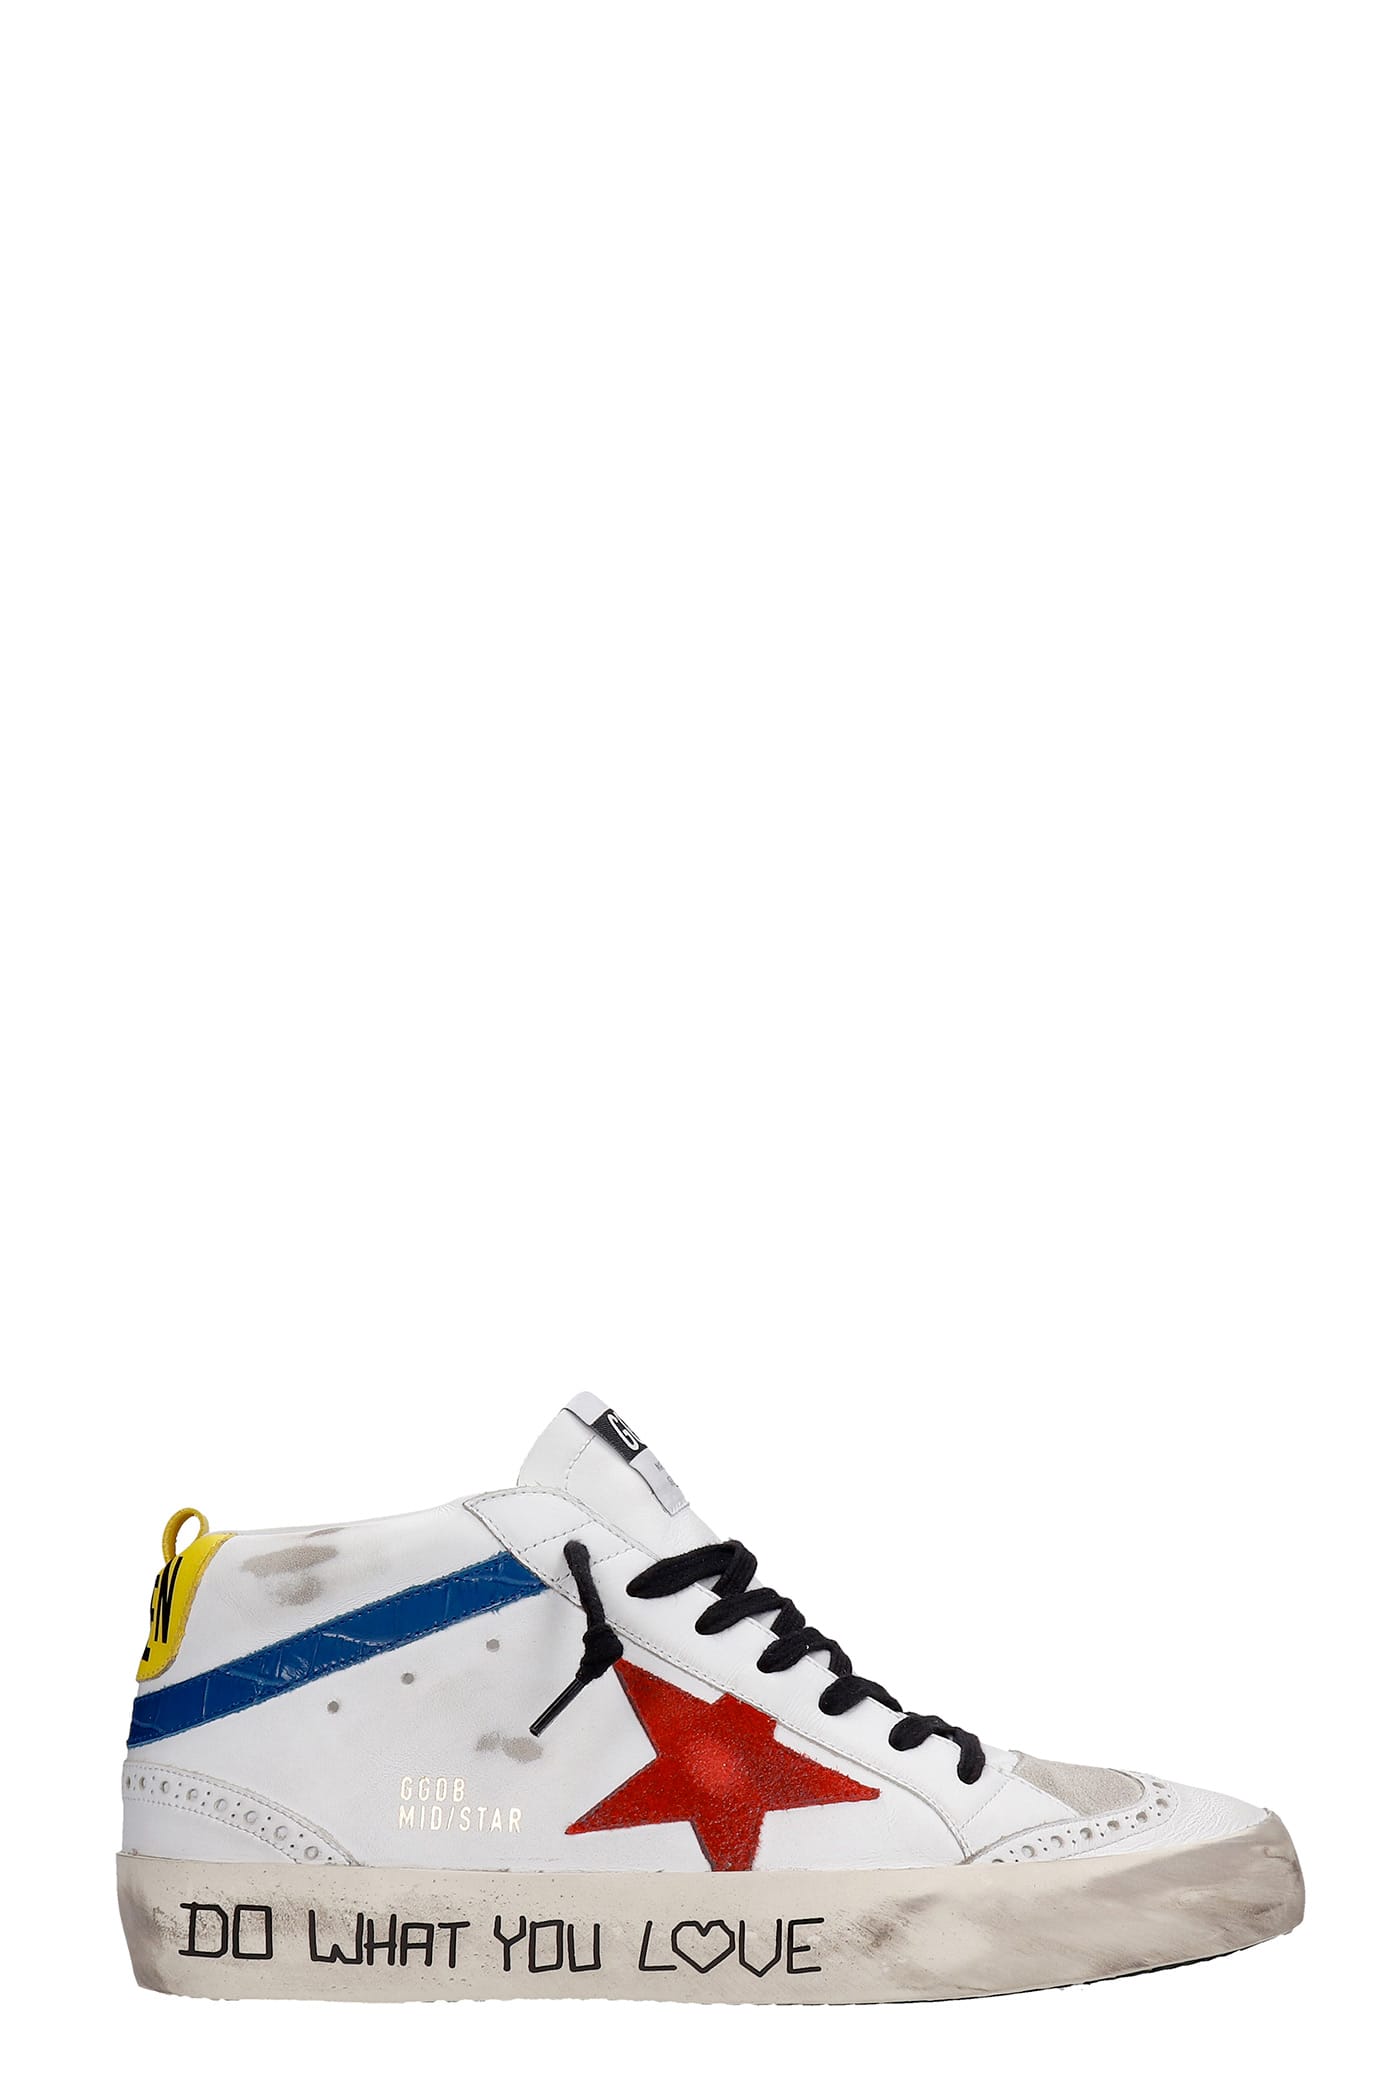 GOLDEN GOOSE MID STAR SNEAKERS IN WHITE LEATHER,GMF00122F00125010535